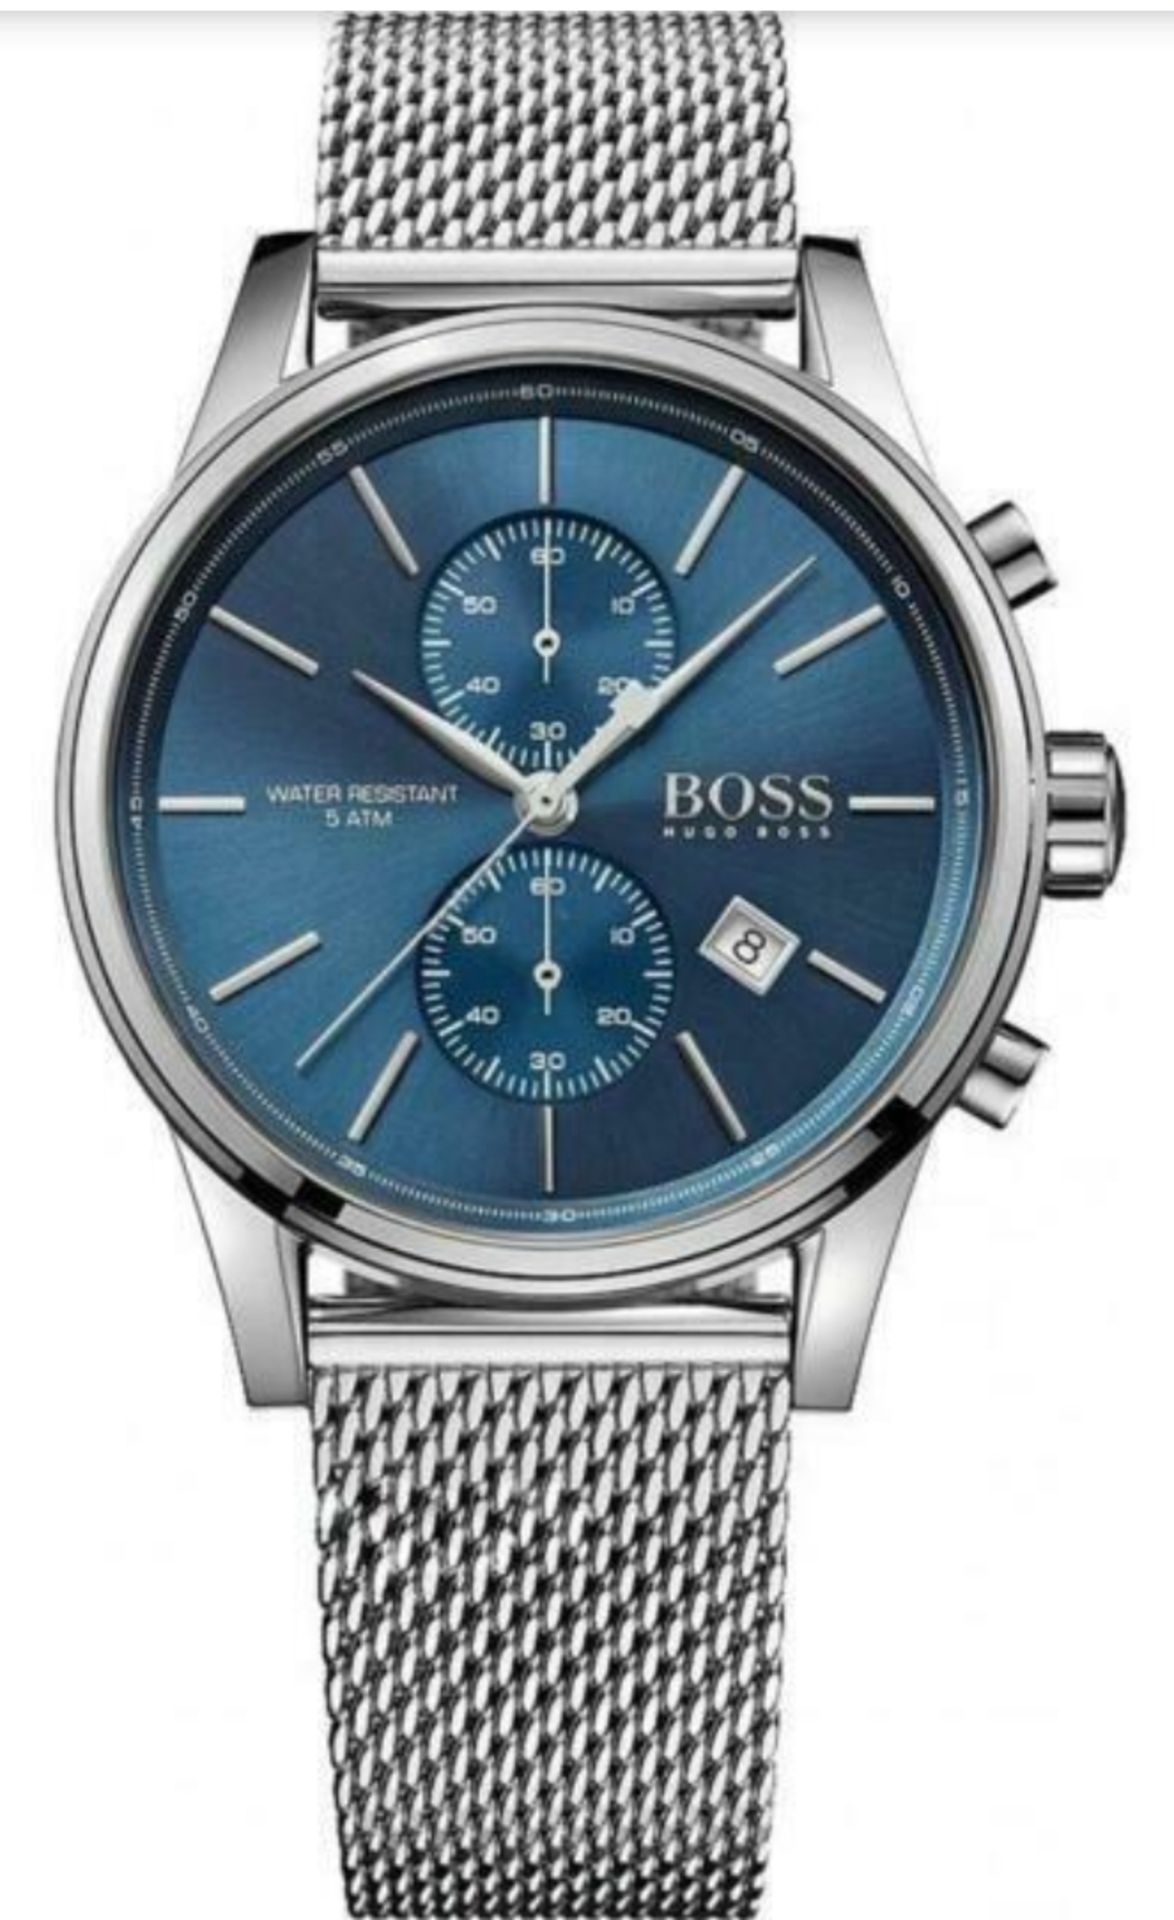 Hugo Boss Trade Lot 1C. A Total Of 20 Brand New Hugo Boss Watches - Image 12 of 20